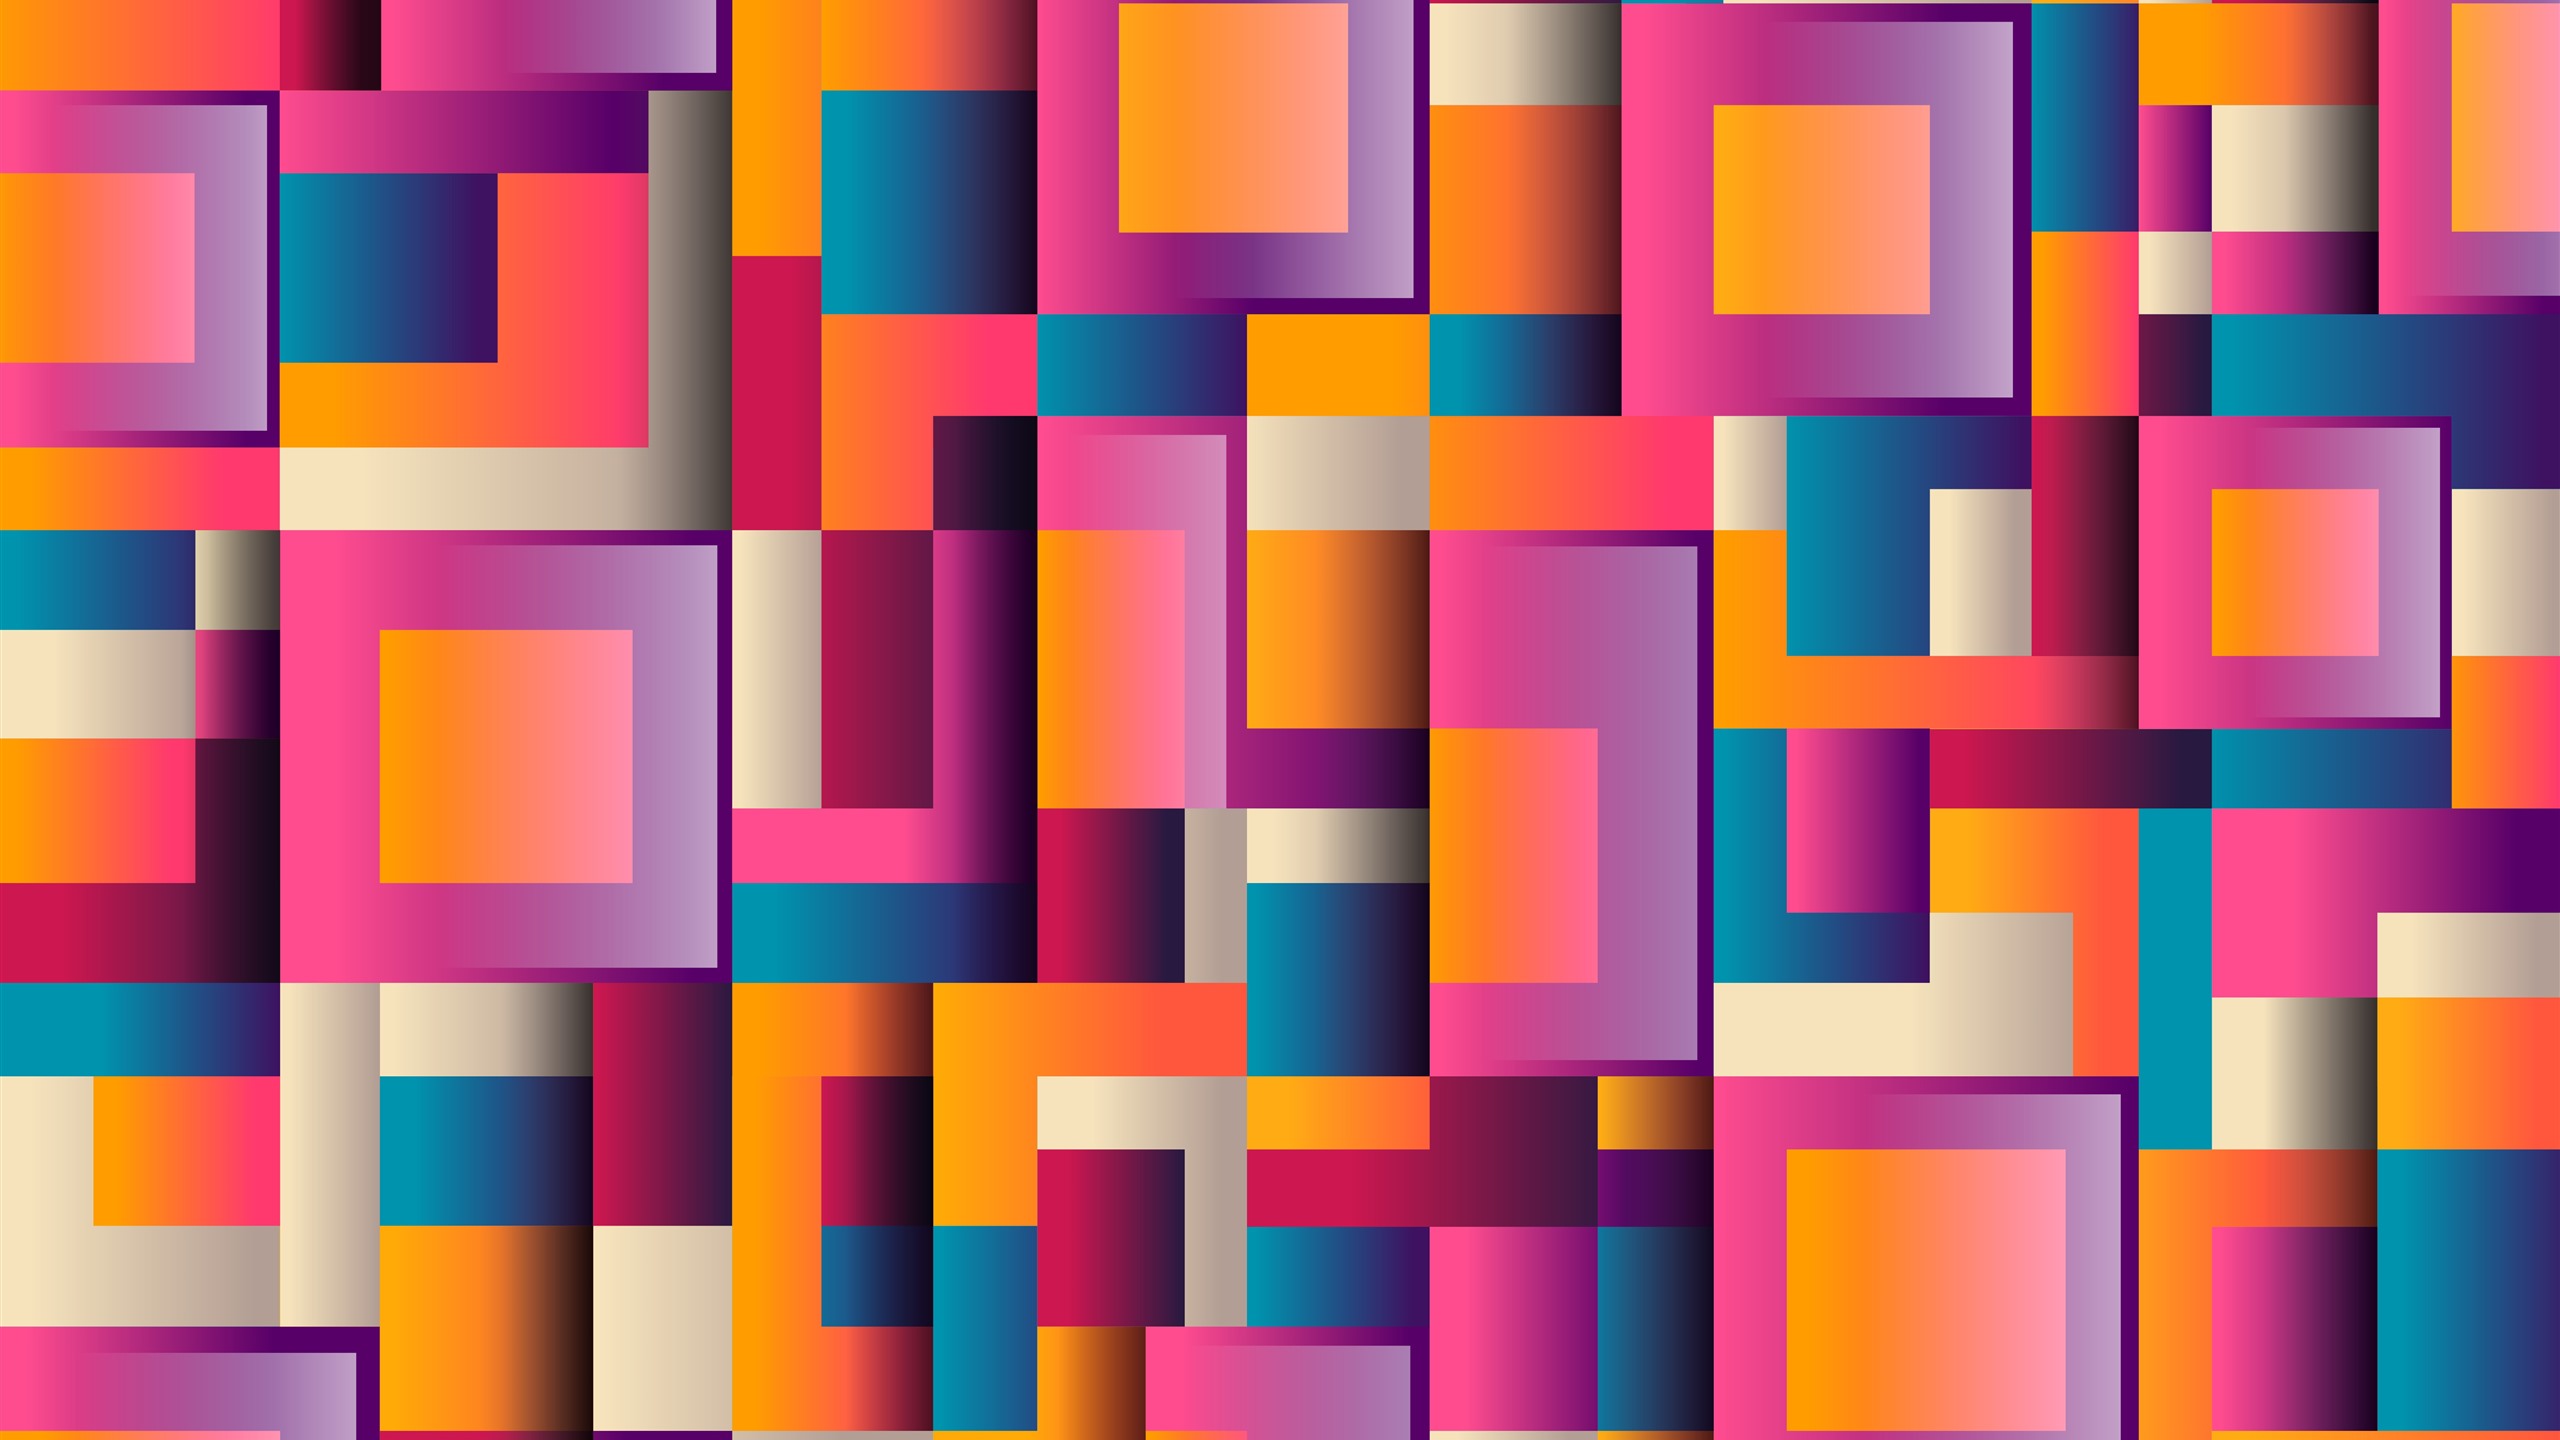 Wallpaper Colorful squares, geometric, abstract background 5120x2880 UHD 5K Picture, Image